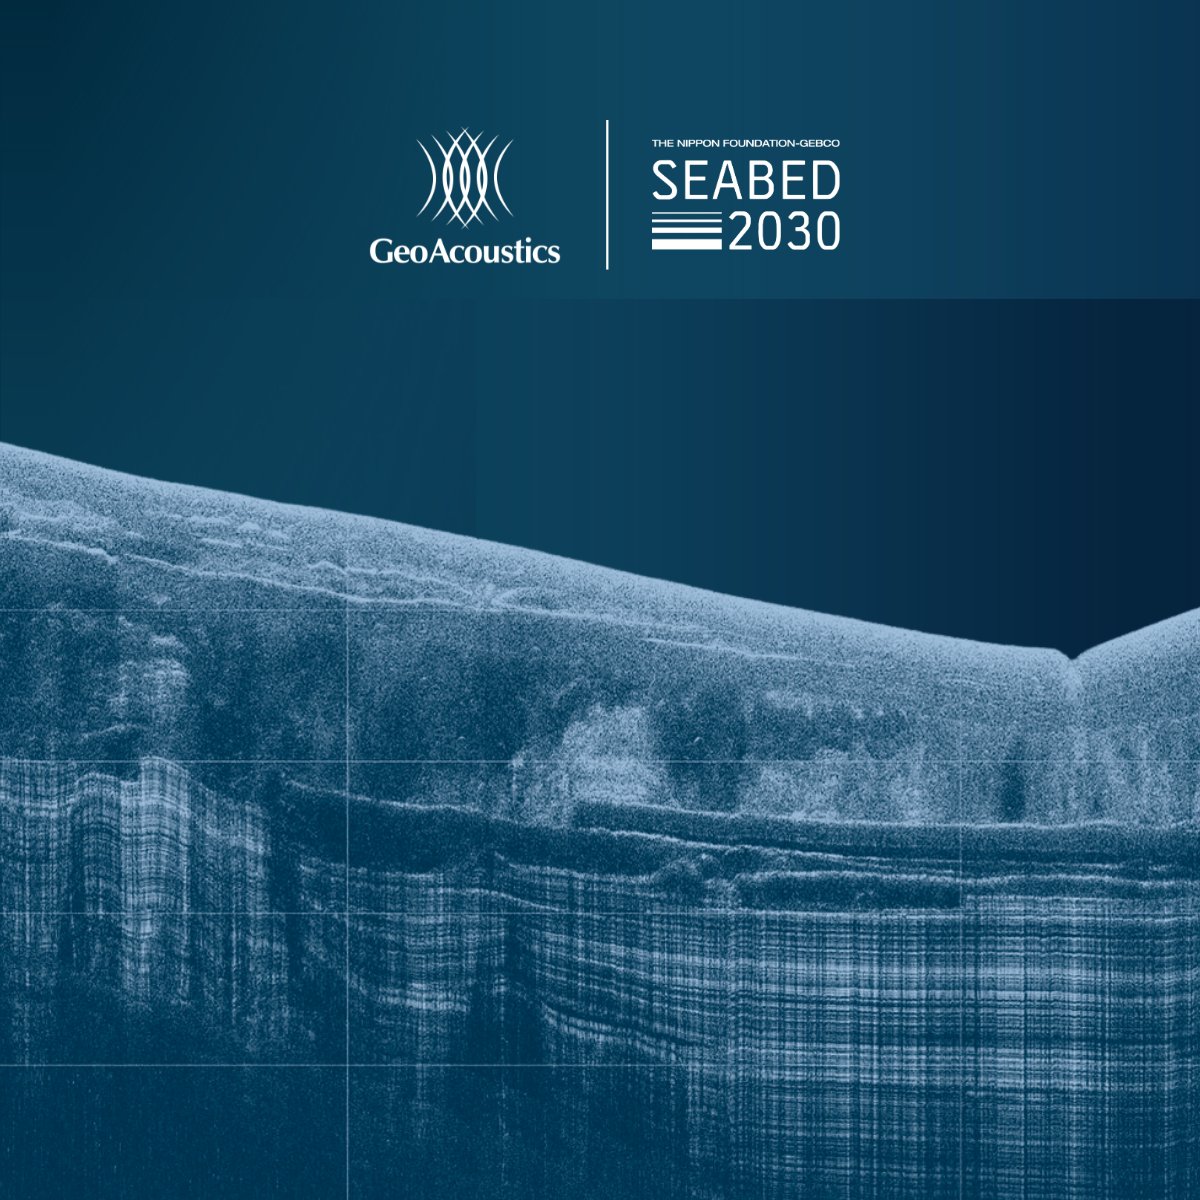 Technology plays a pivotal role in ocean research. This is one of the many reasons we’re pleased to have @geoacoustics as a partner. The company builds hydroacoustic #technologies that significantly boost underwater data collection efforts. Learn more👉 geoacoustics.com